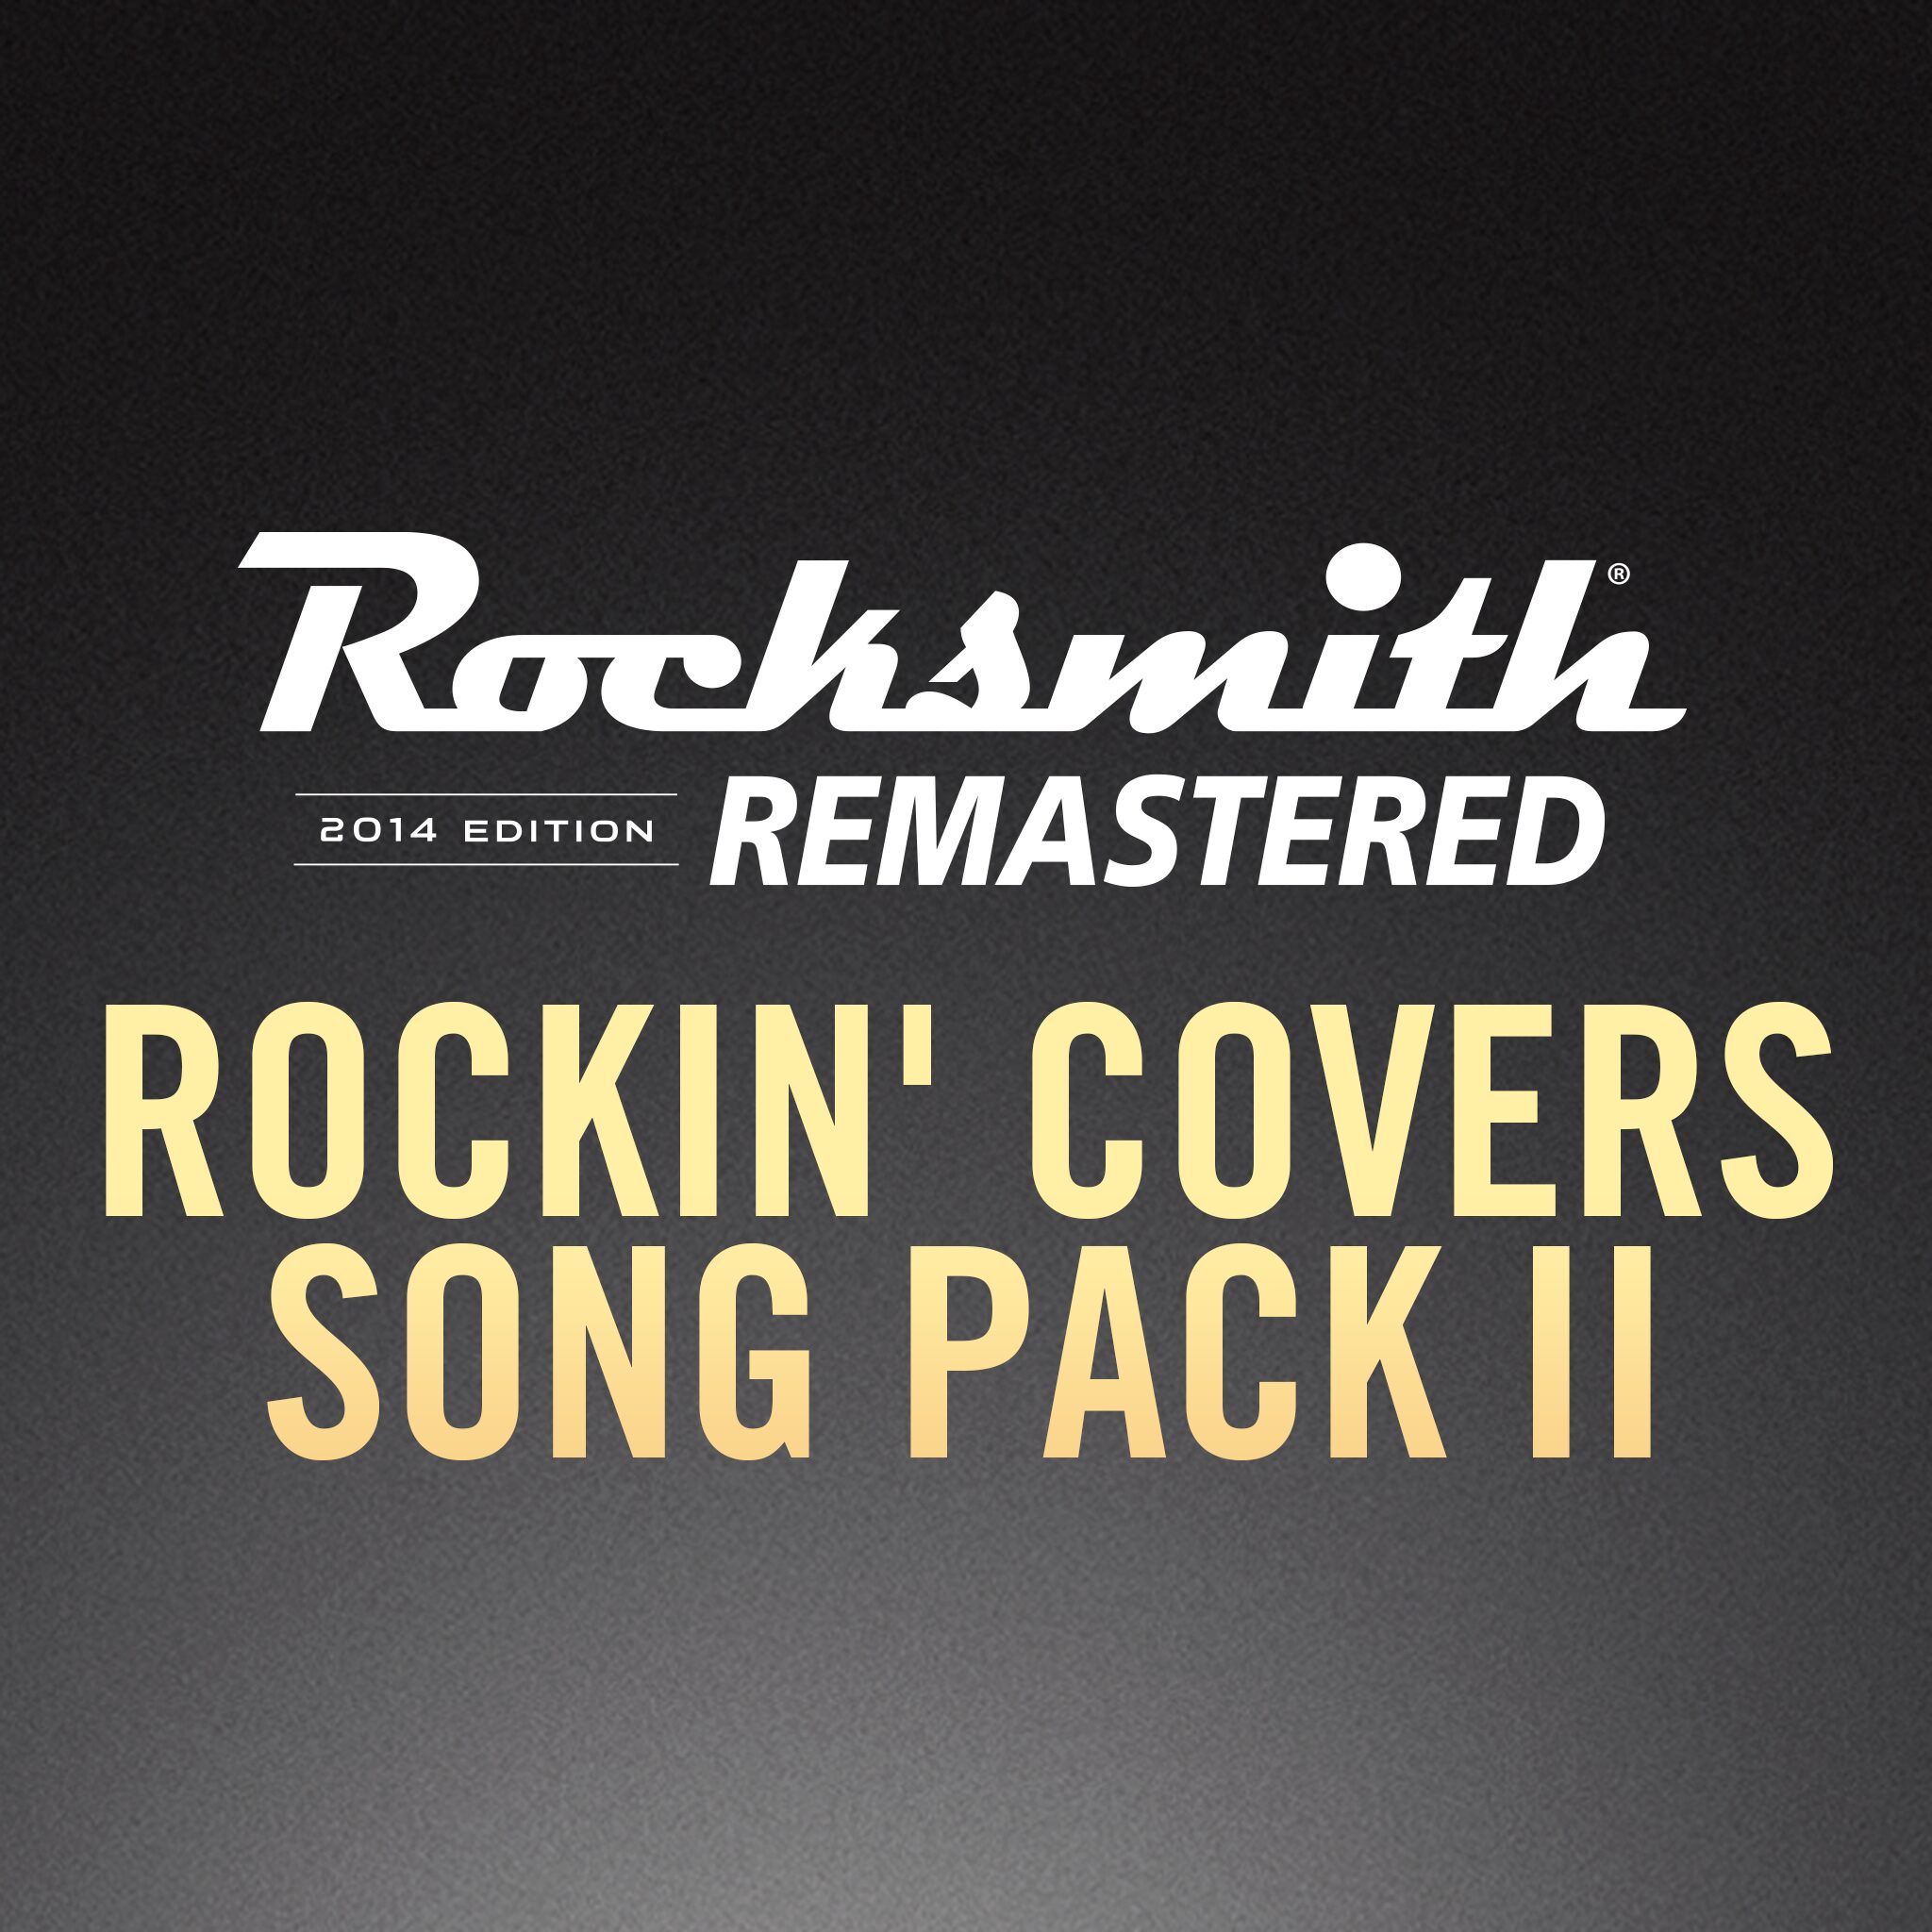 Rocksmith 2014 - Rockin’ Covers Song Pack II